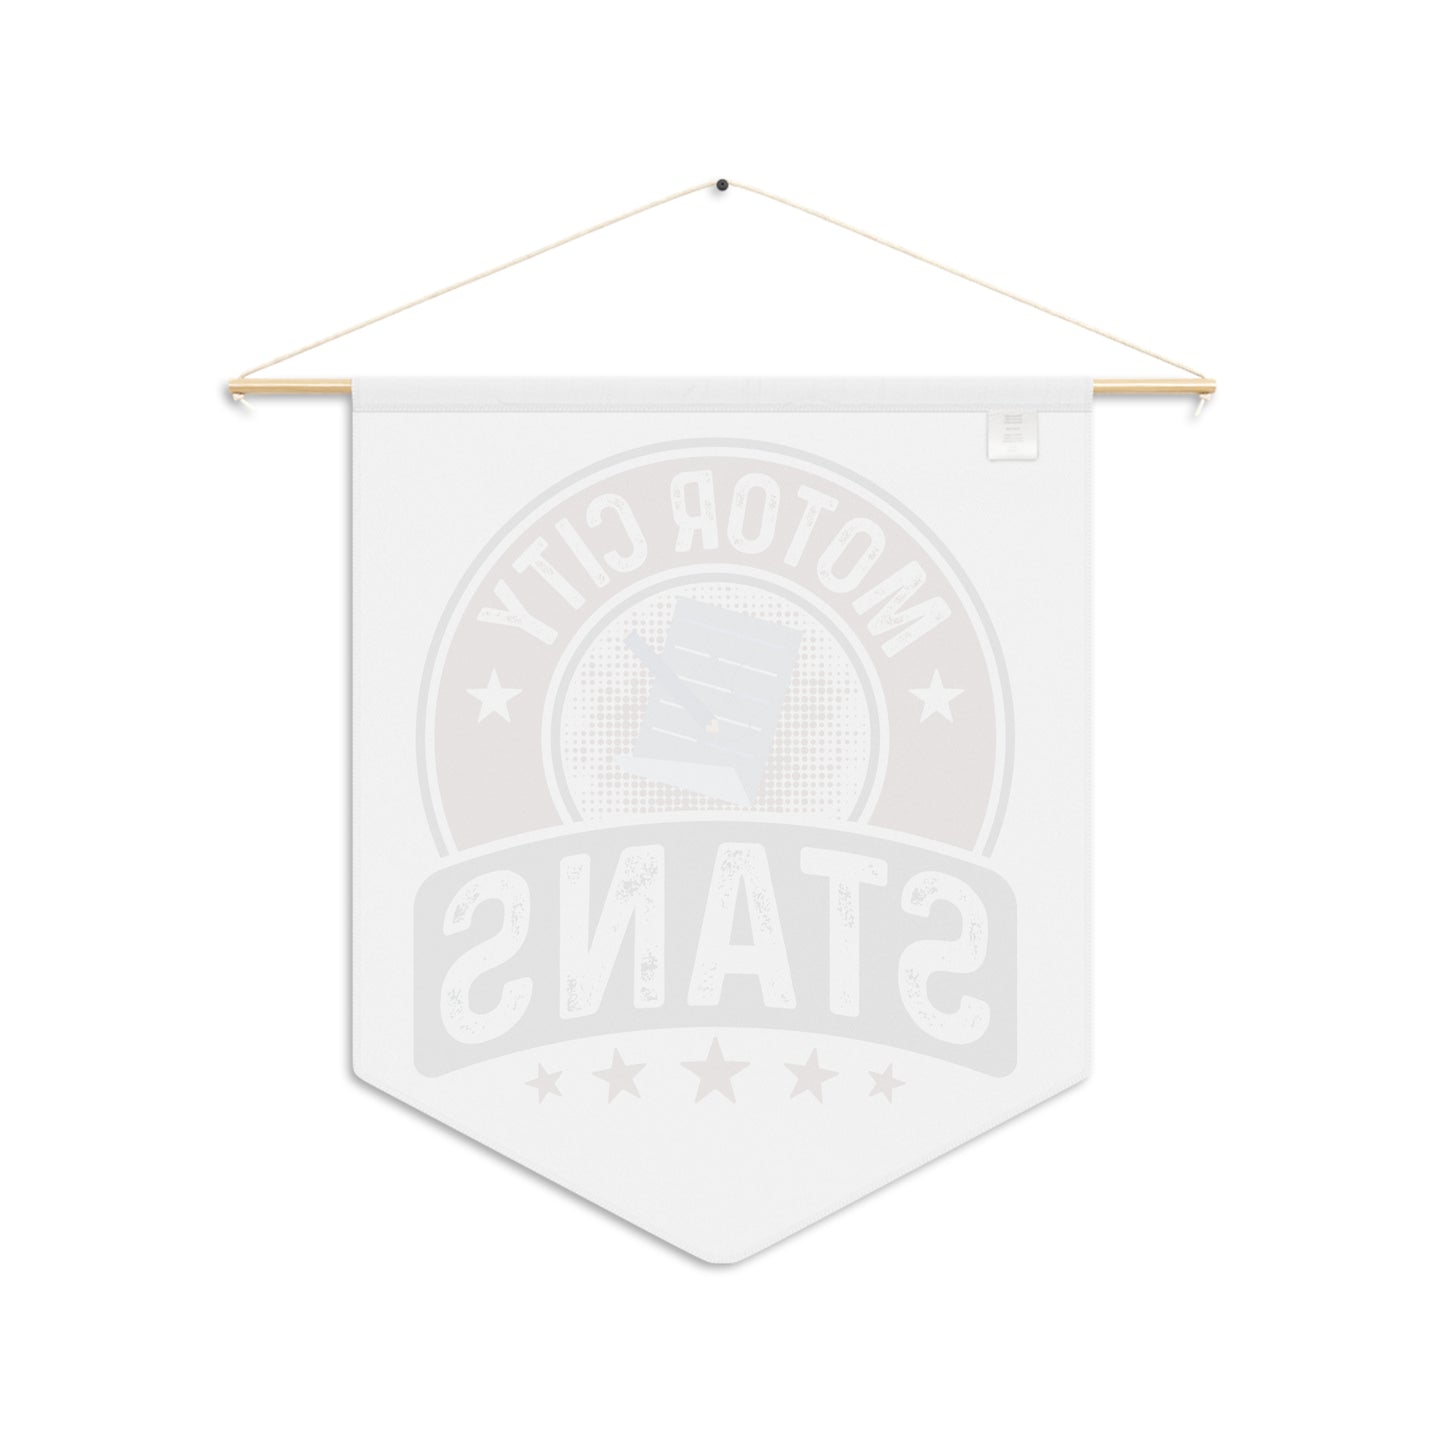 Motor City Stans Pennant